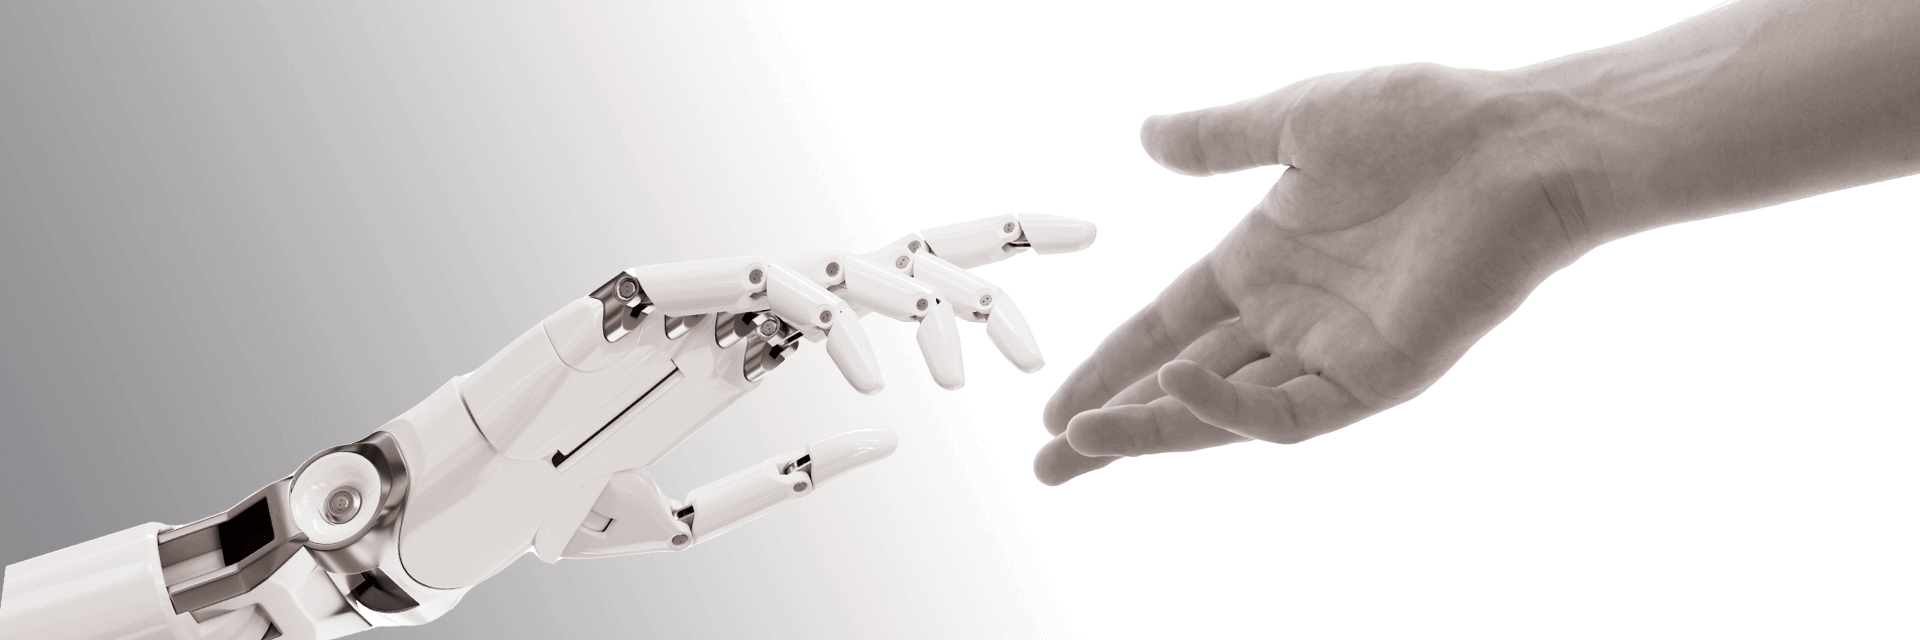 Robotic hand and human had reaching for one another